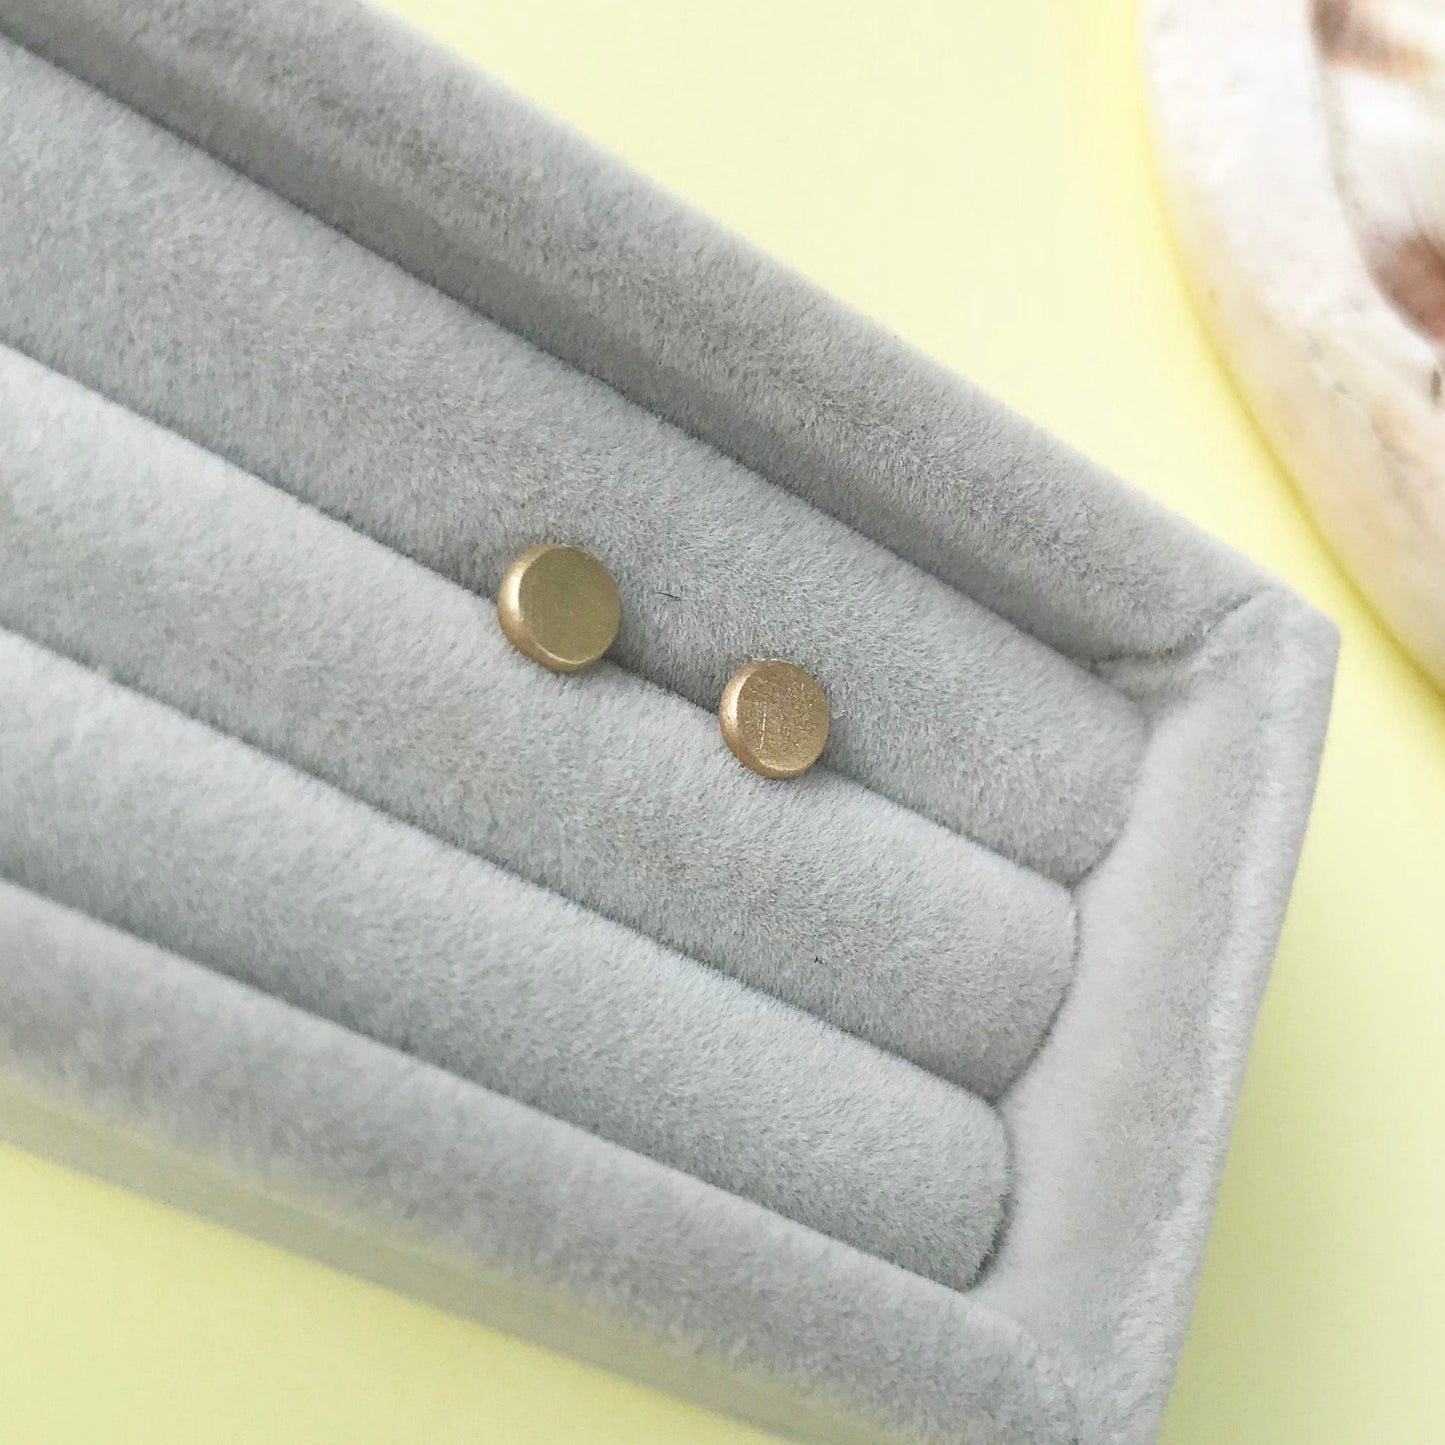 9ct yellow gold bubble stud earrings, 9ct gold earrings, 9ct yellow gold circle earrings, gold circle studs, simple studs, 9ct yellow gold stud earrings